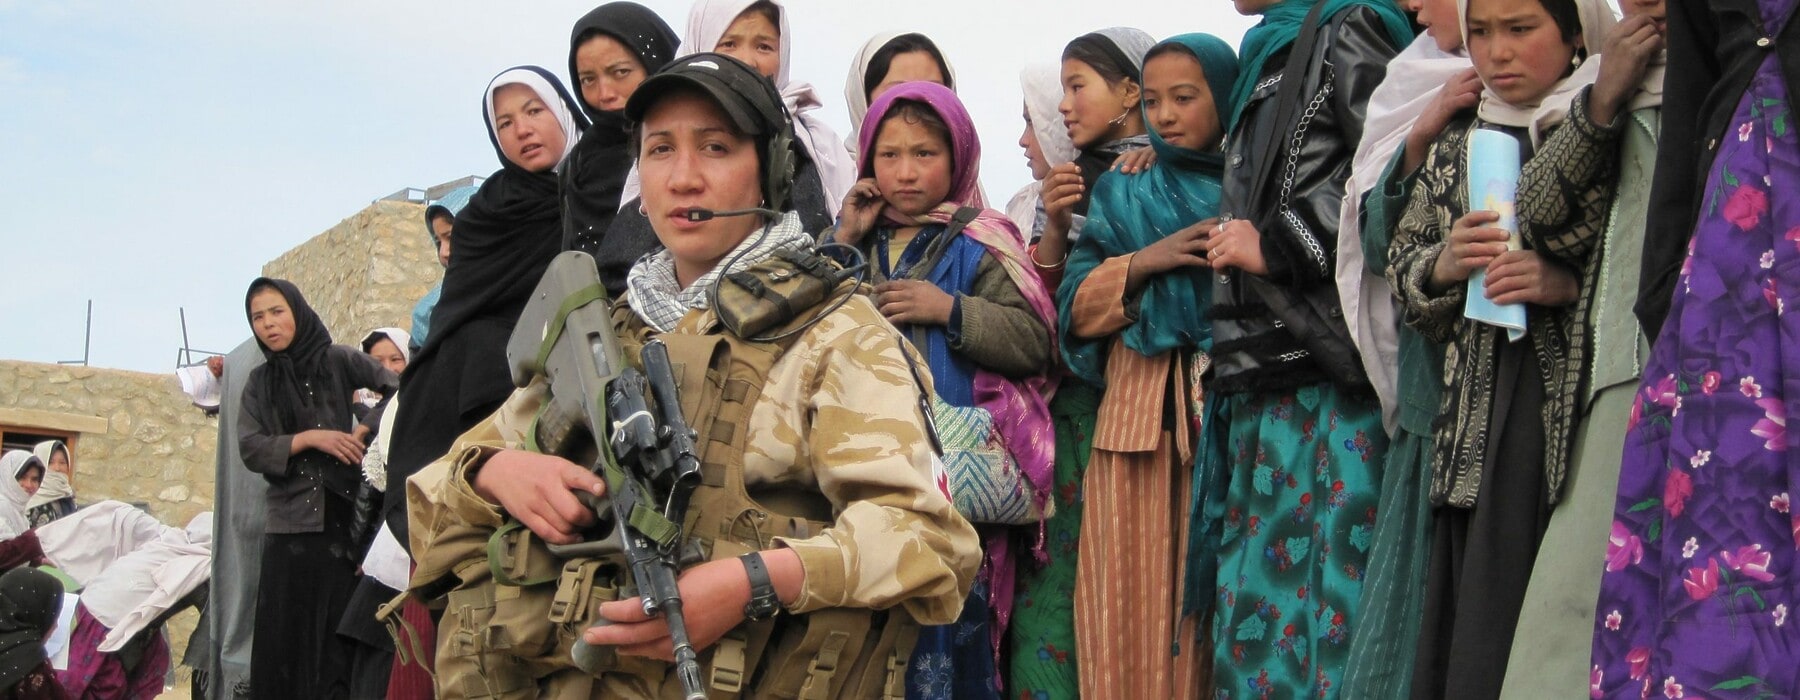 A woman holding a gun standing in front of several children